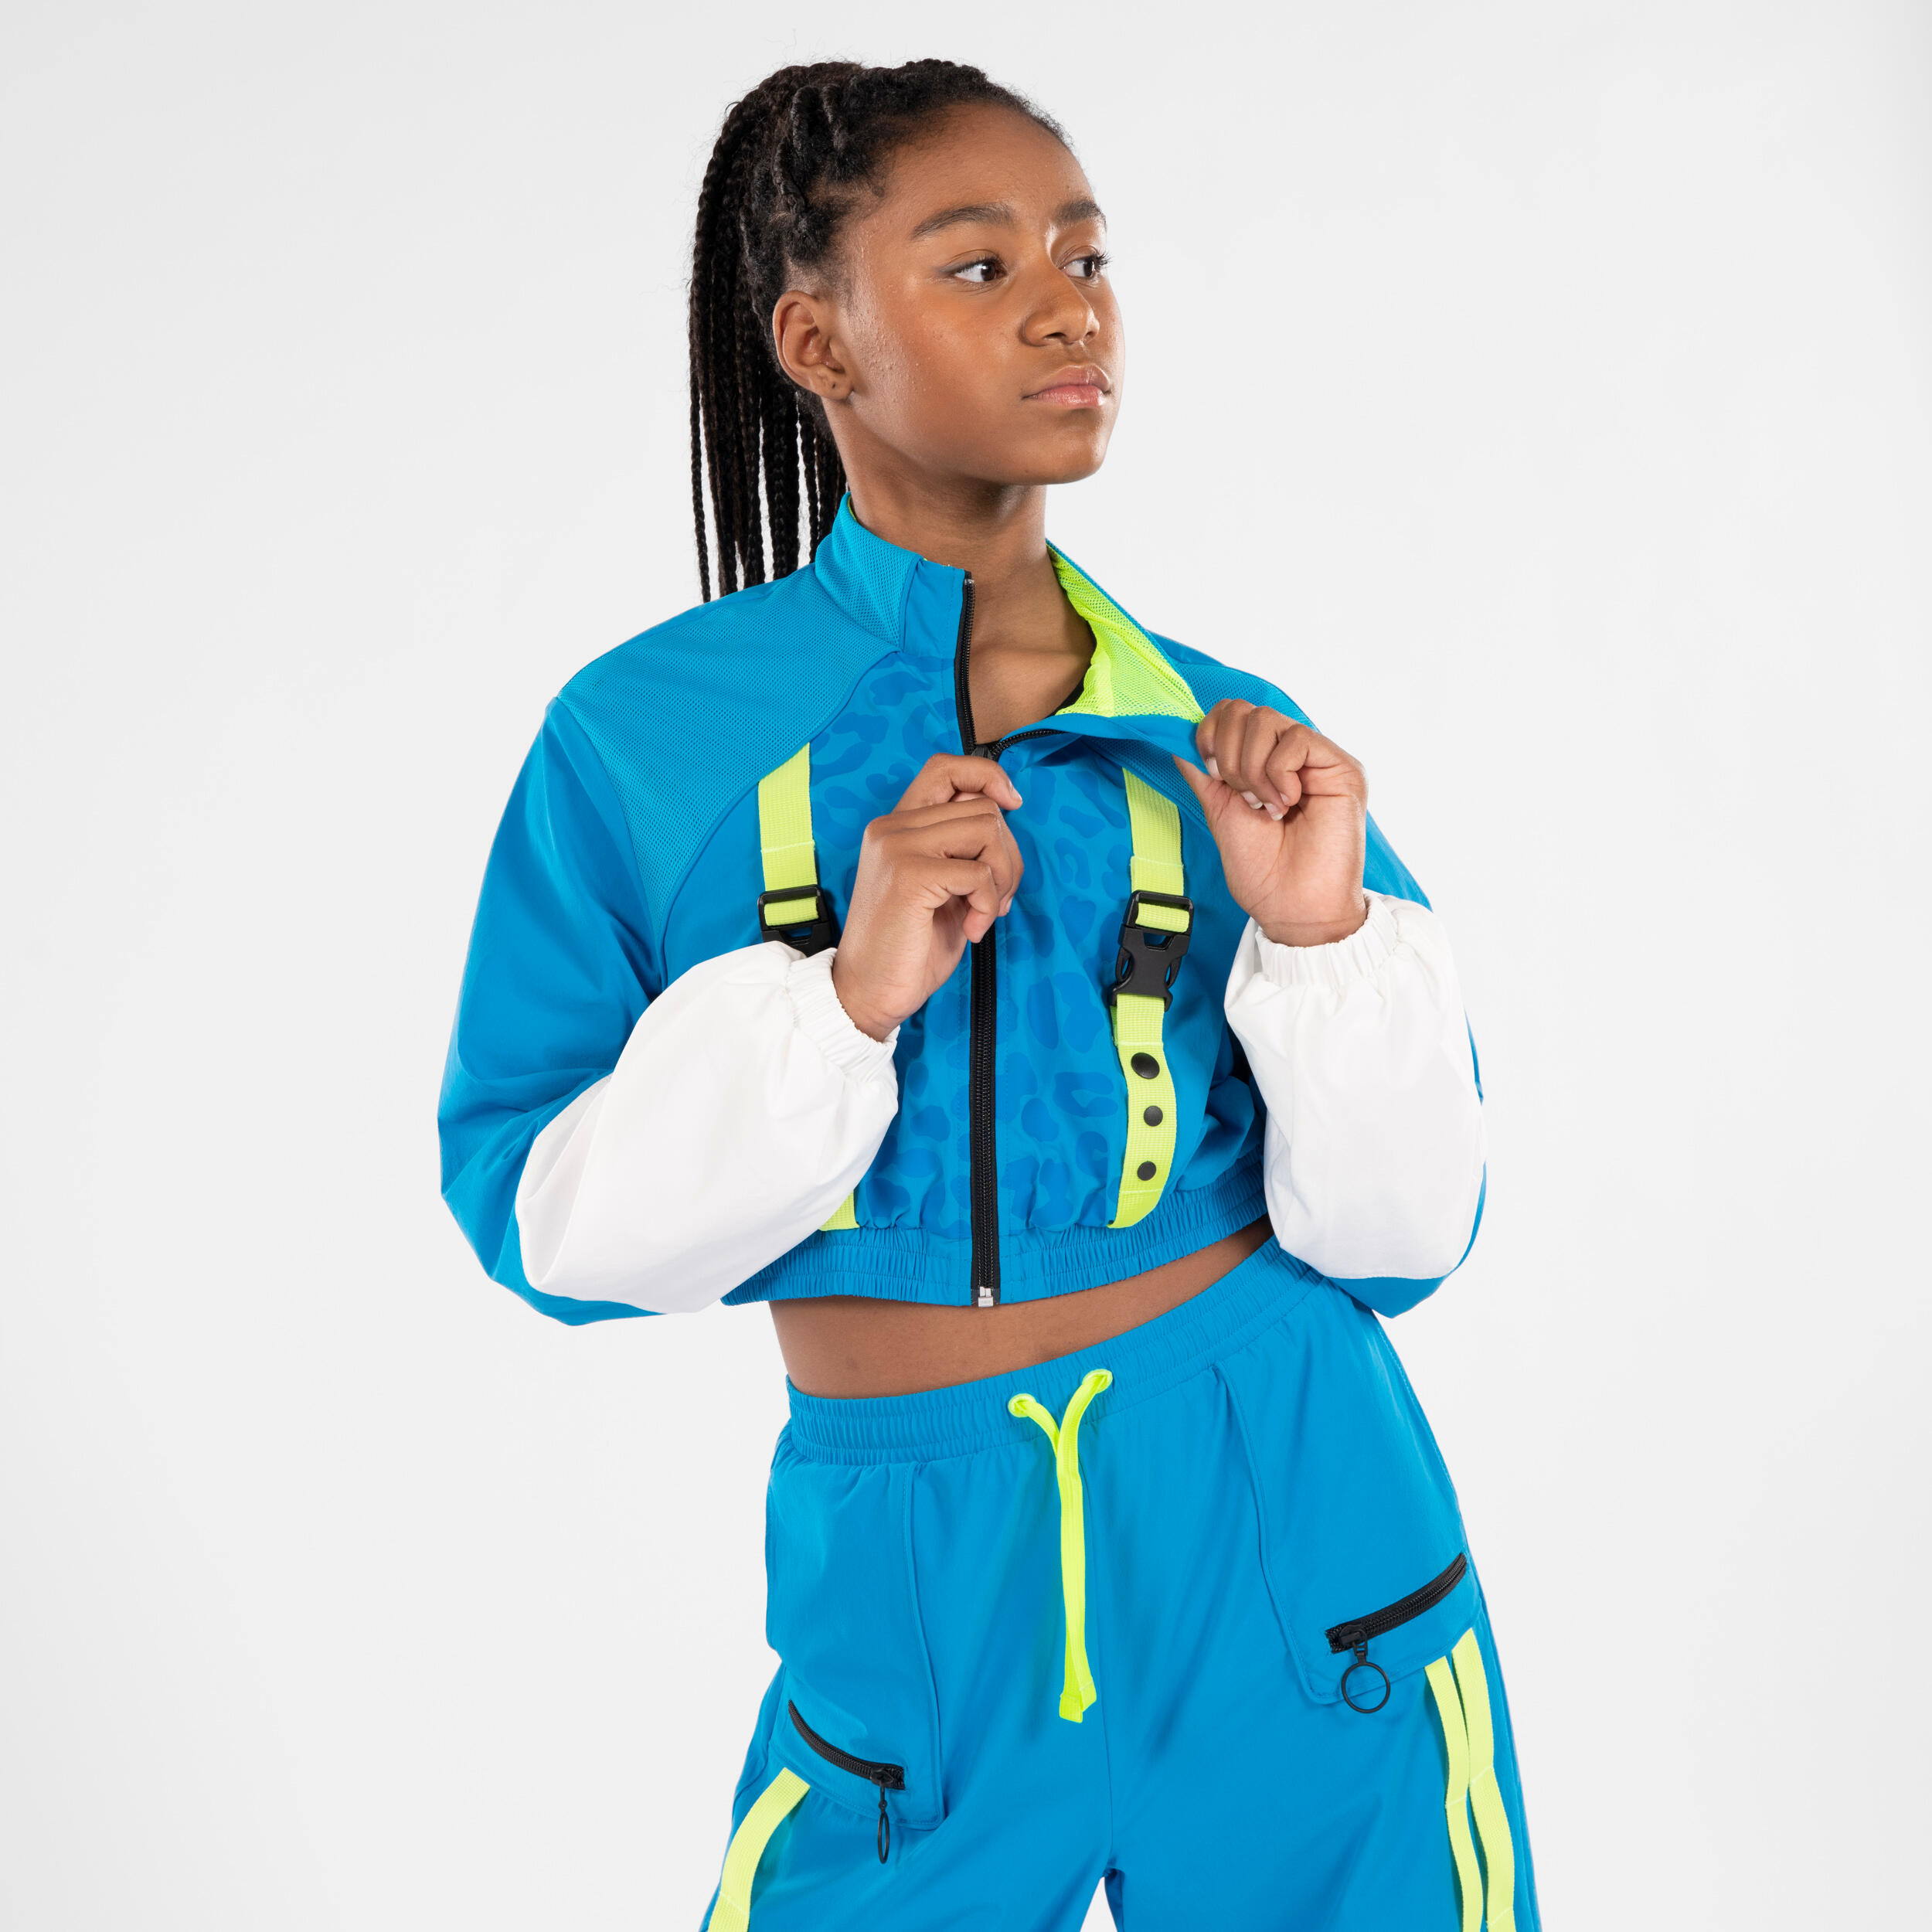 STAREVER Girls' Commercial/Street Dance Loose-Fit Cropped Jacket Sabrina Lonis - Blue